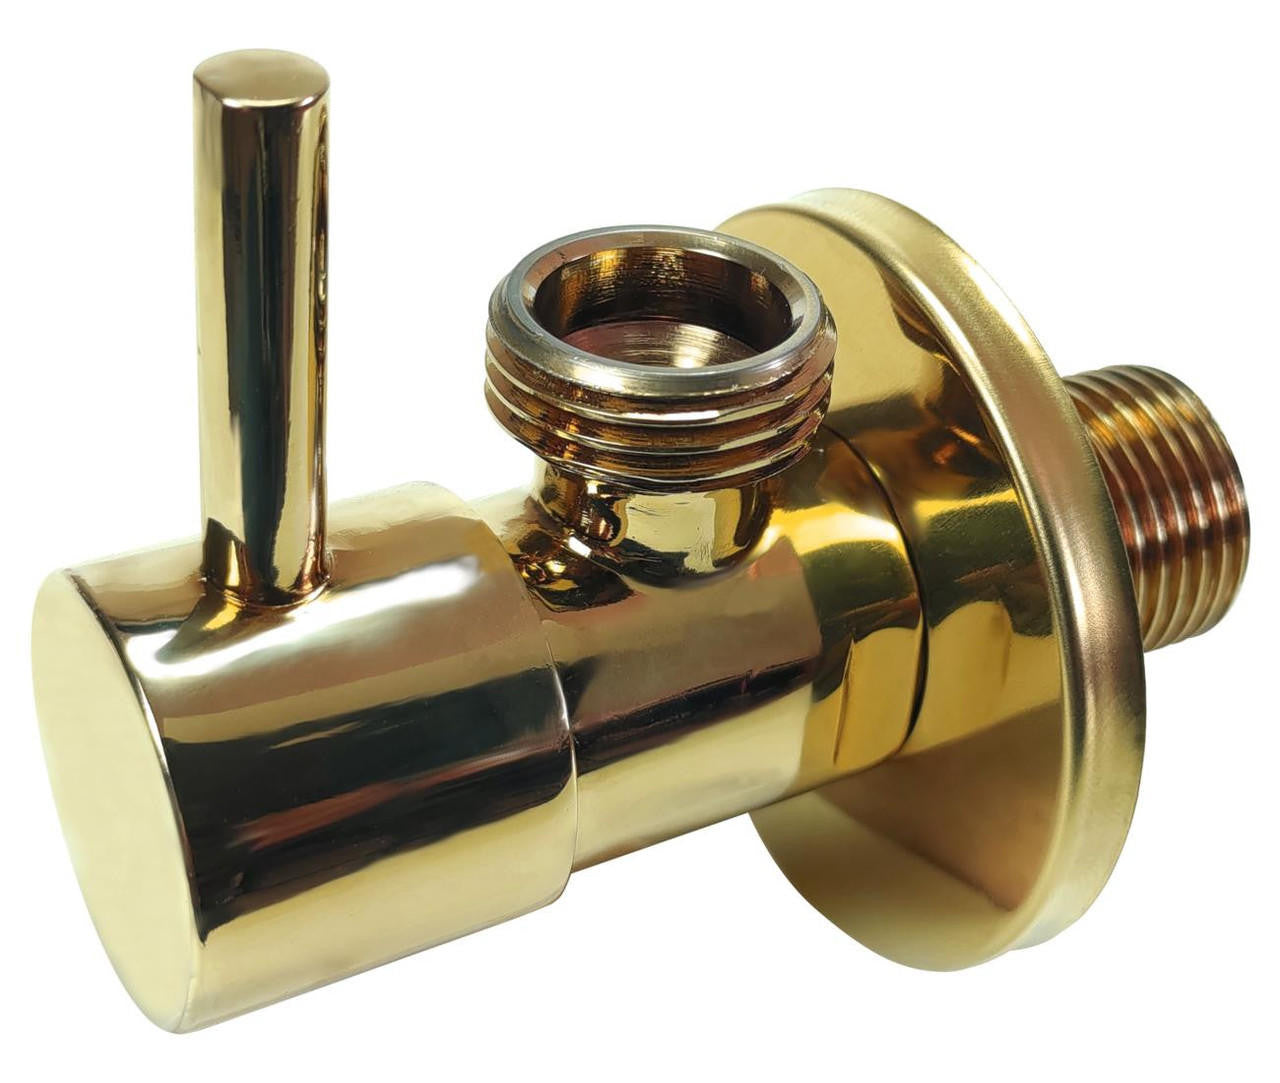 Tycner Gold Brass Basin Sink Toilet Hose Valve Water Tap Cut-Off Long Lever 